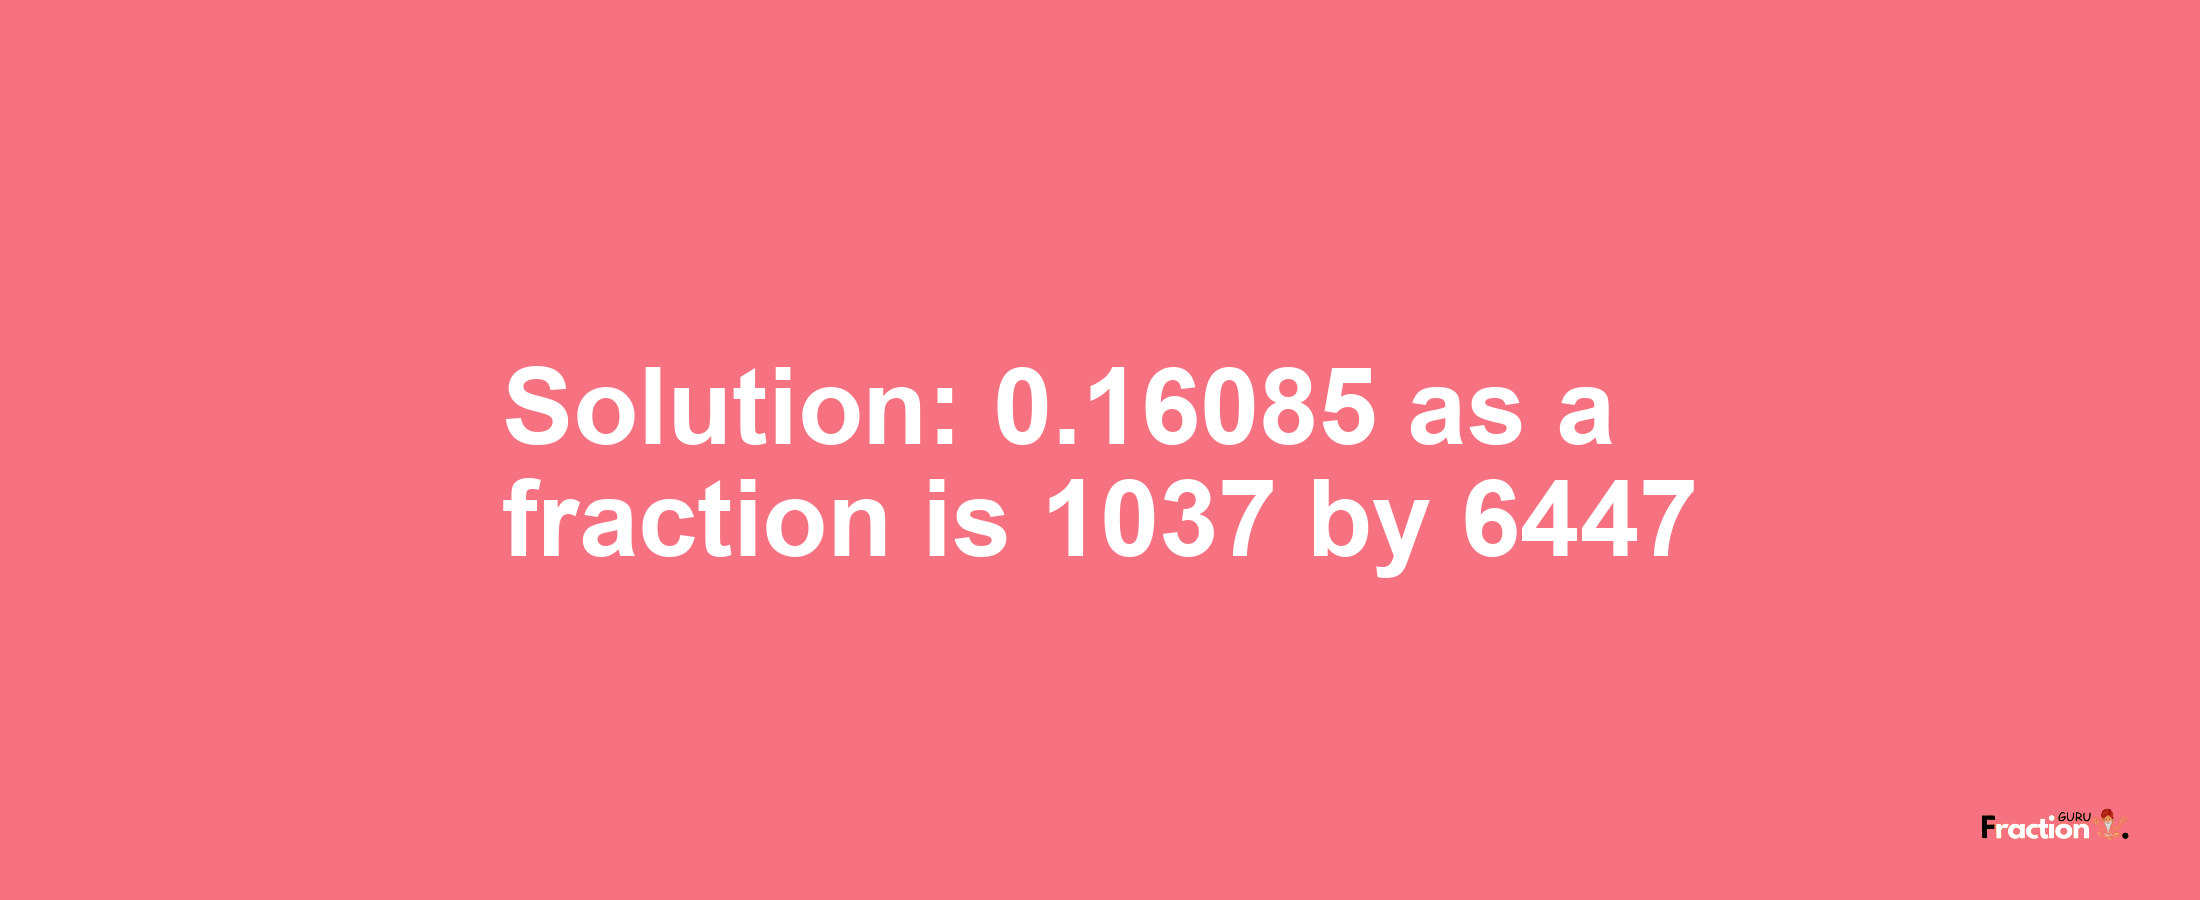 Solution:0.16085 as a fraction is 1037/6447